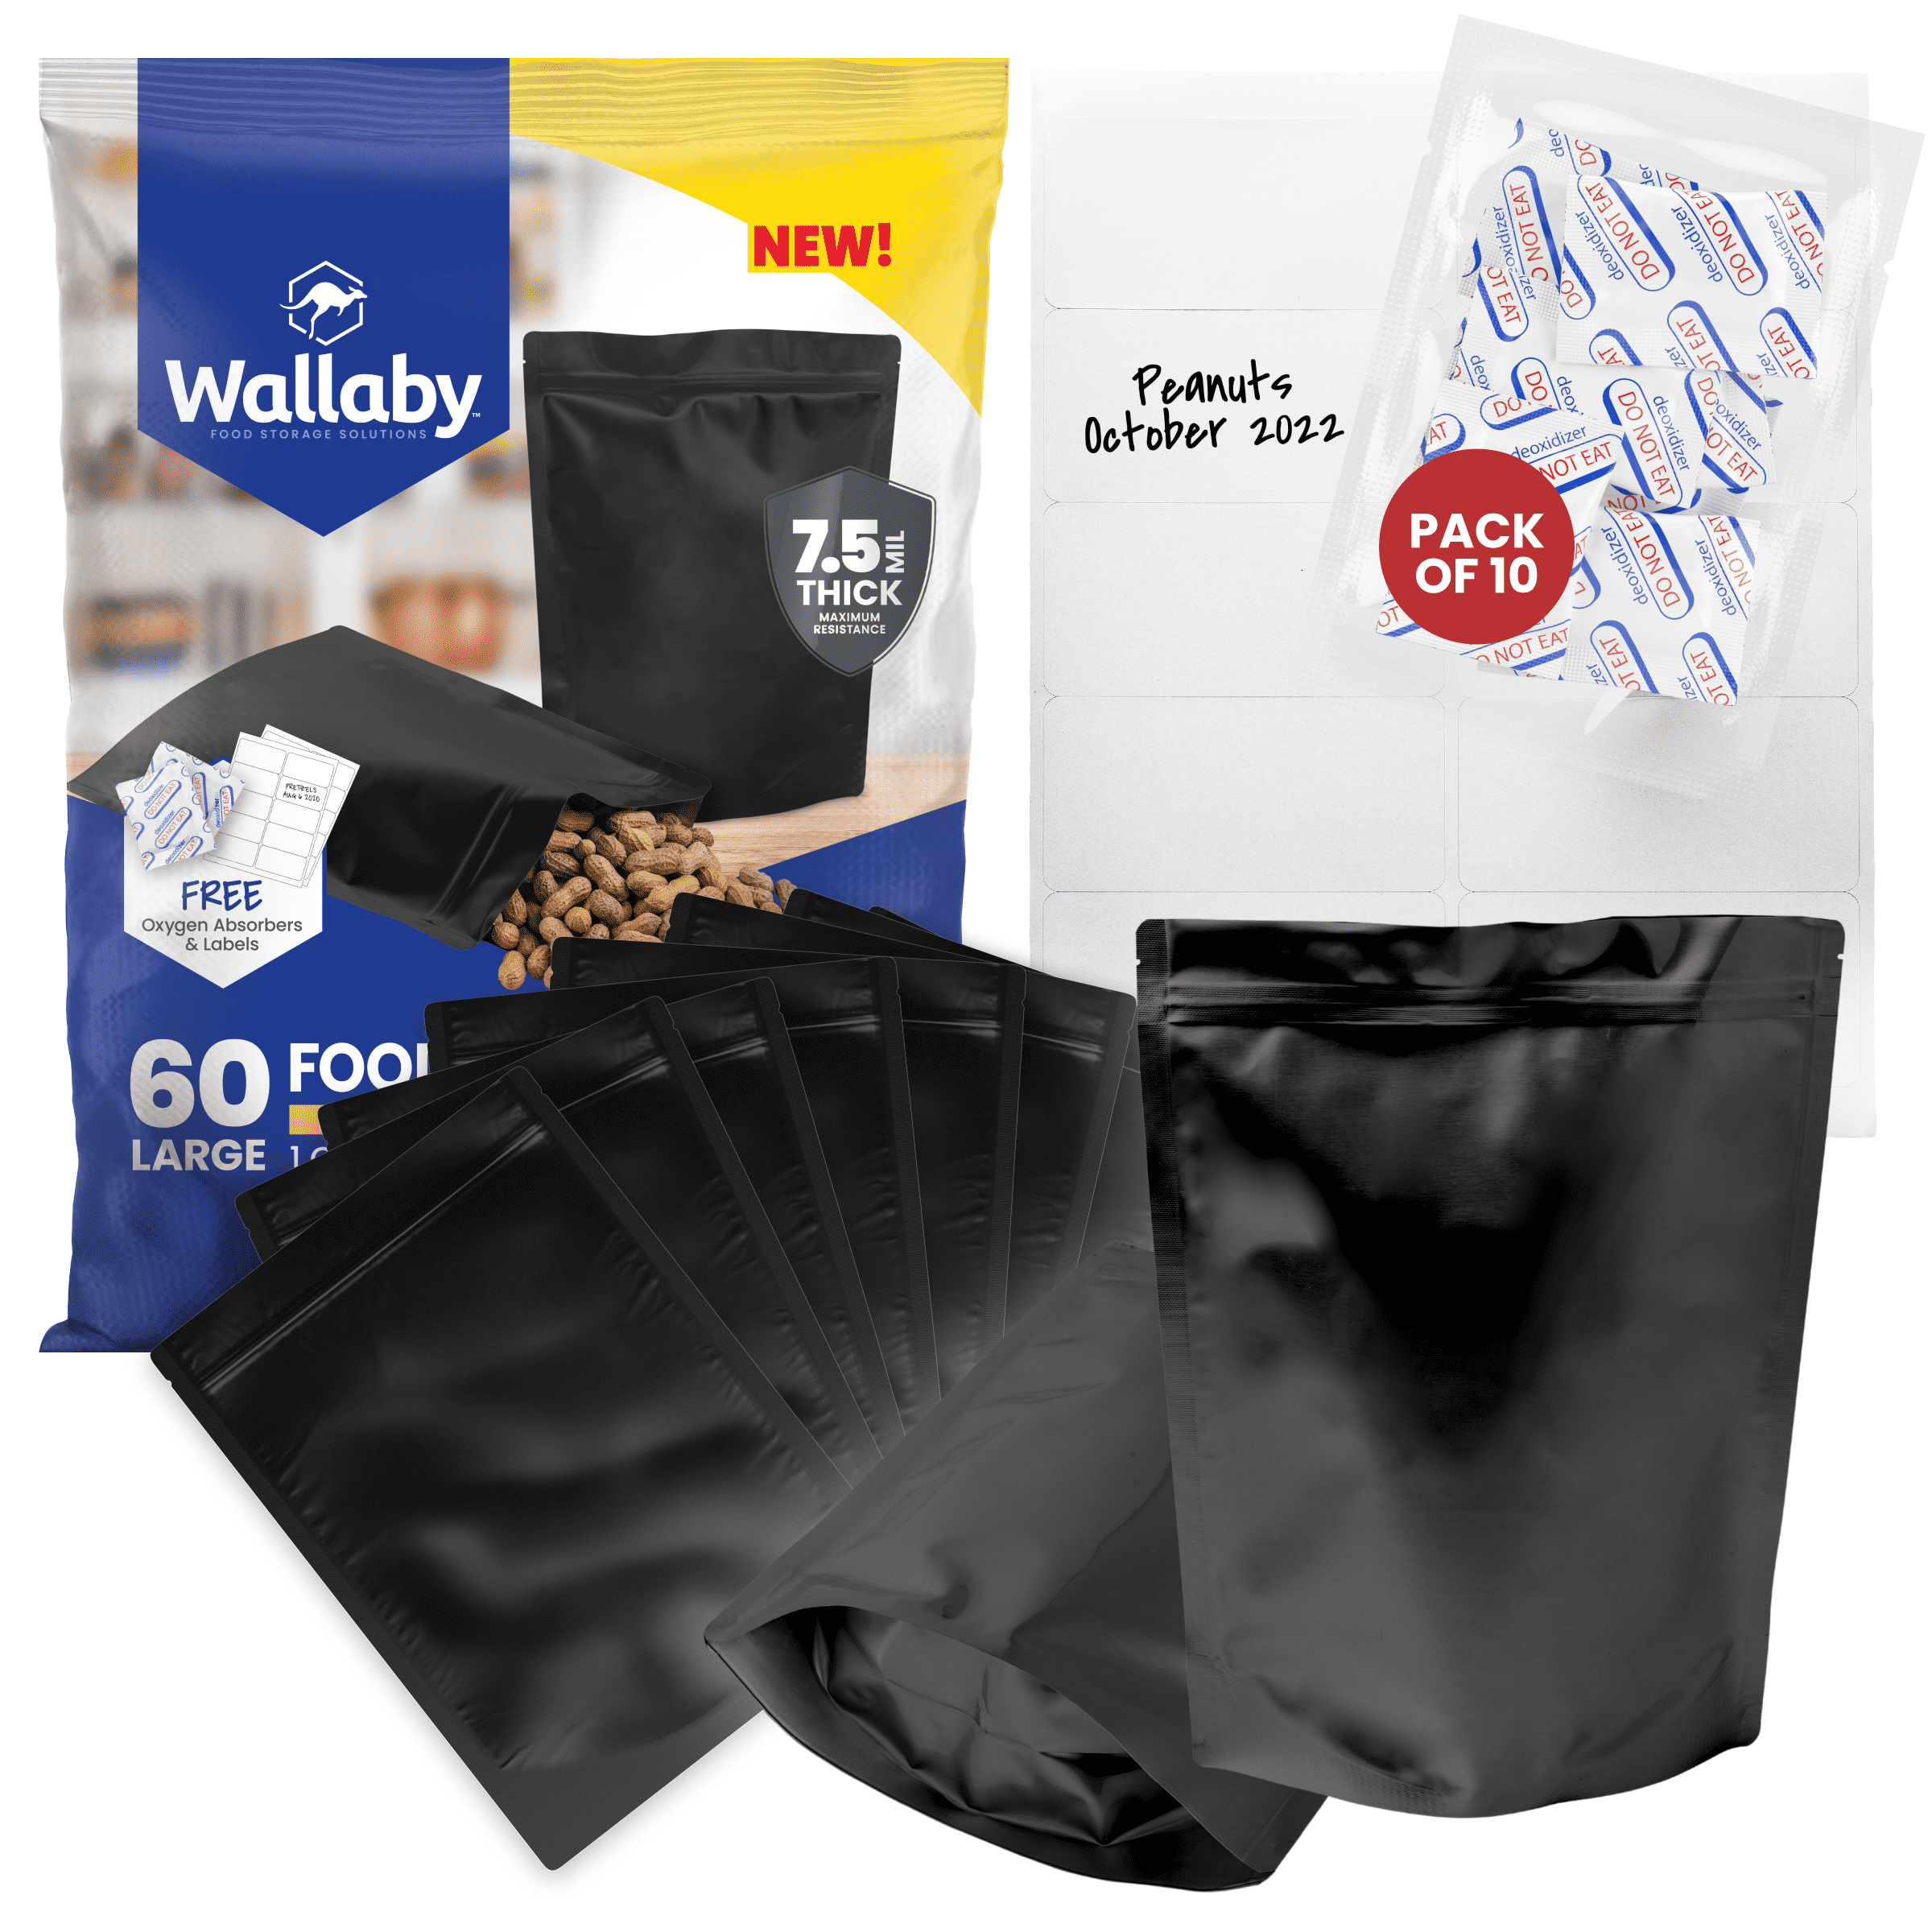 30pcs 2 Gallon Mylar Bags for Food Storage (15 Mil Extra Thick) with Oxygen  Absorbers 400CC (60 pcs), Stand-Up Zipper Pouches Resealable and Heat